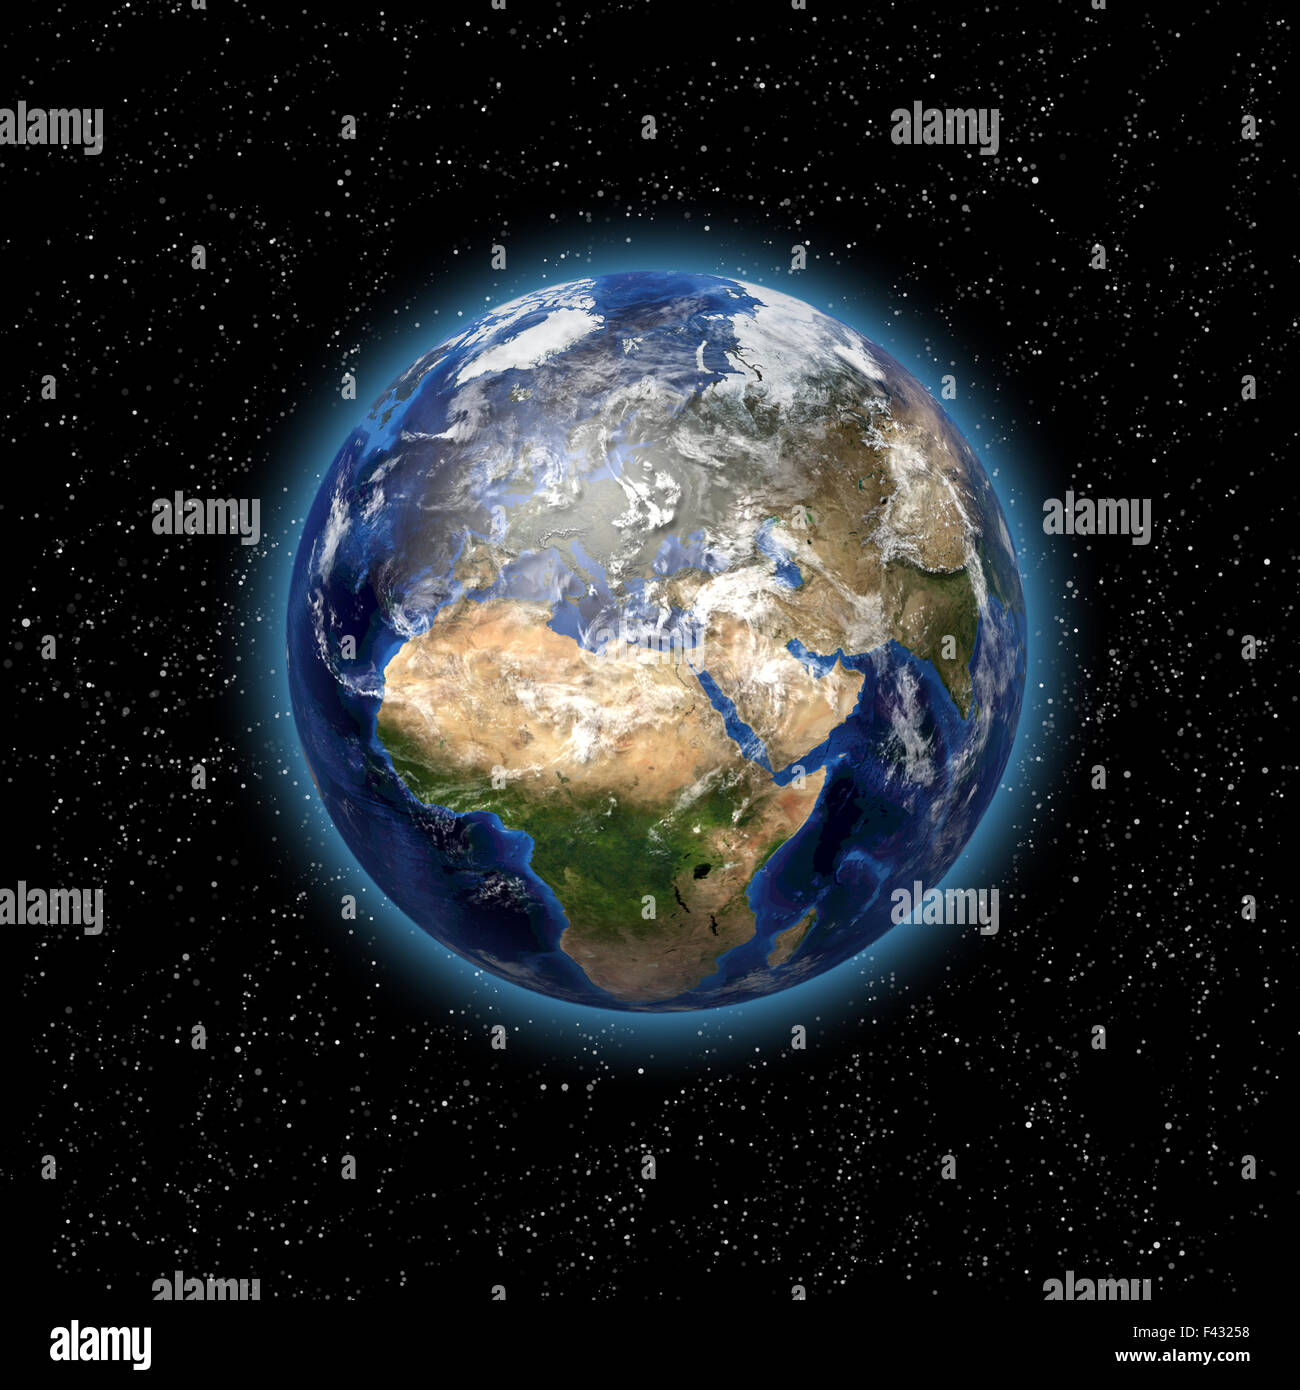 Planet Earth in space Stock Photo